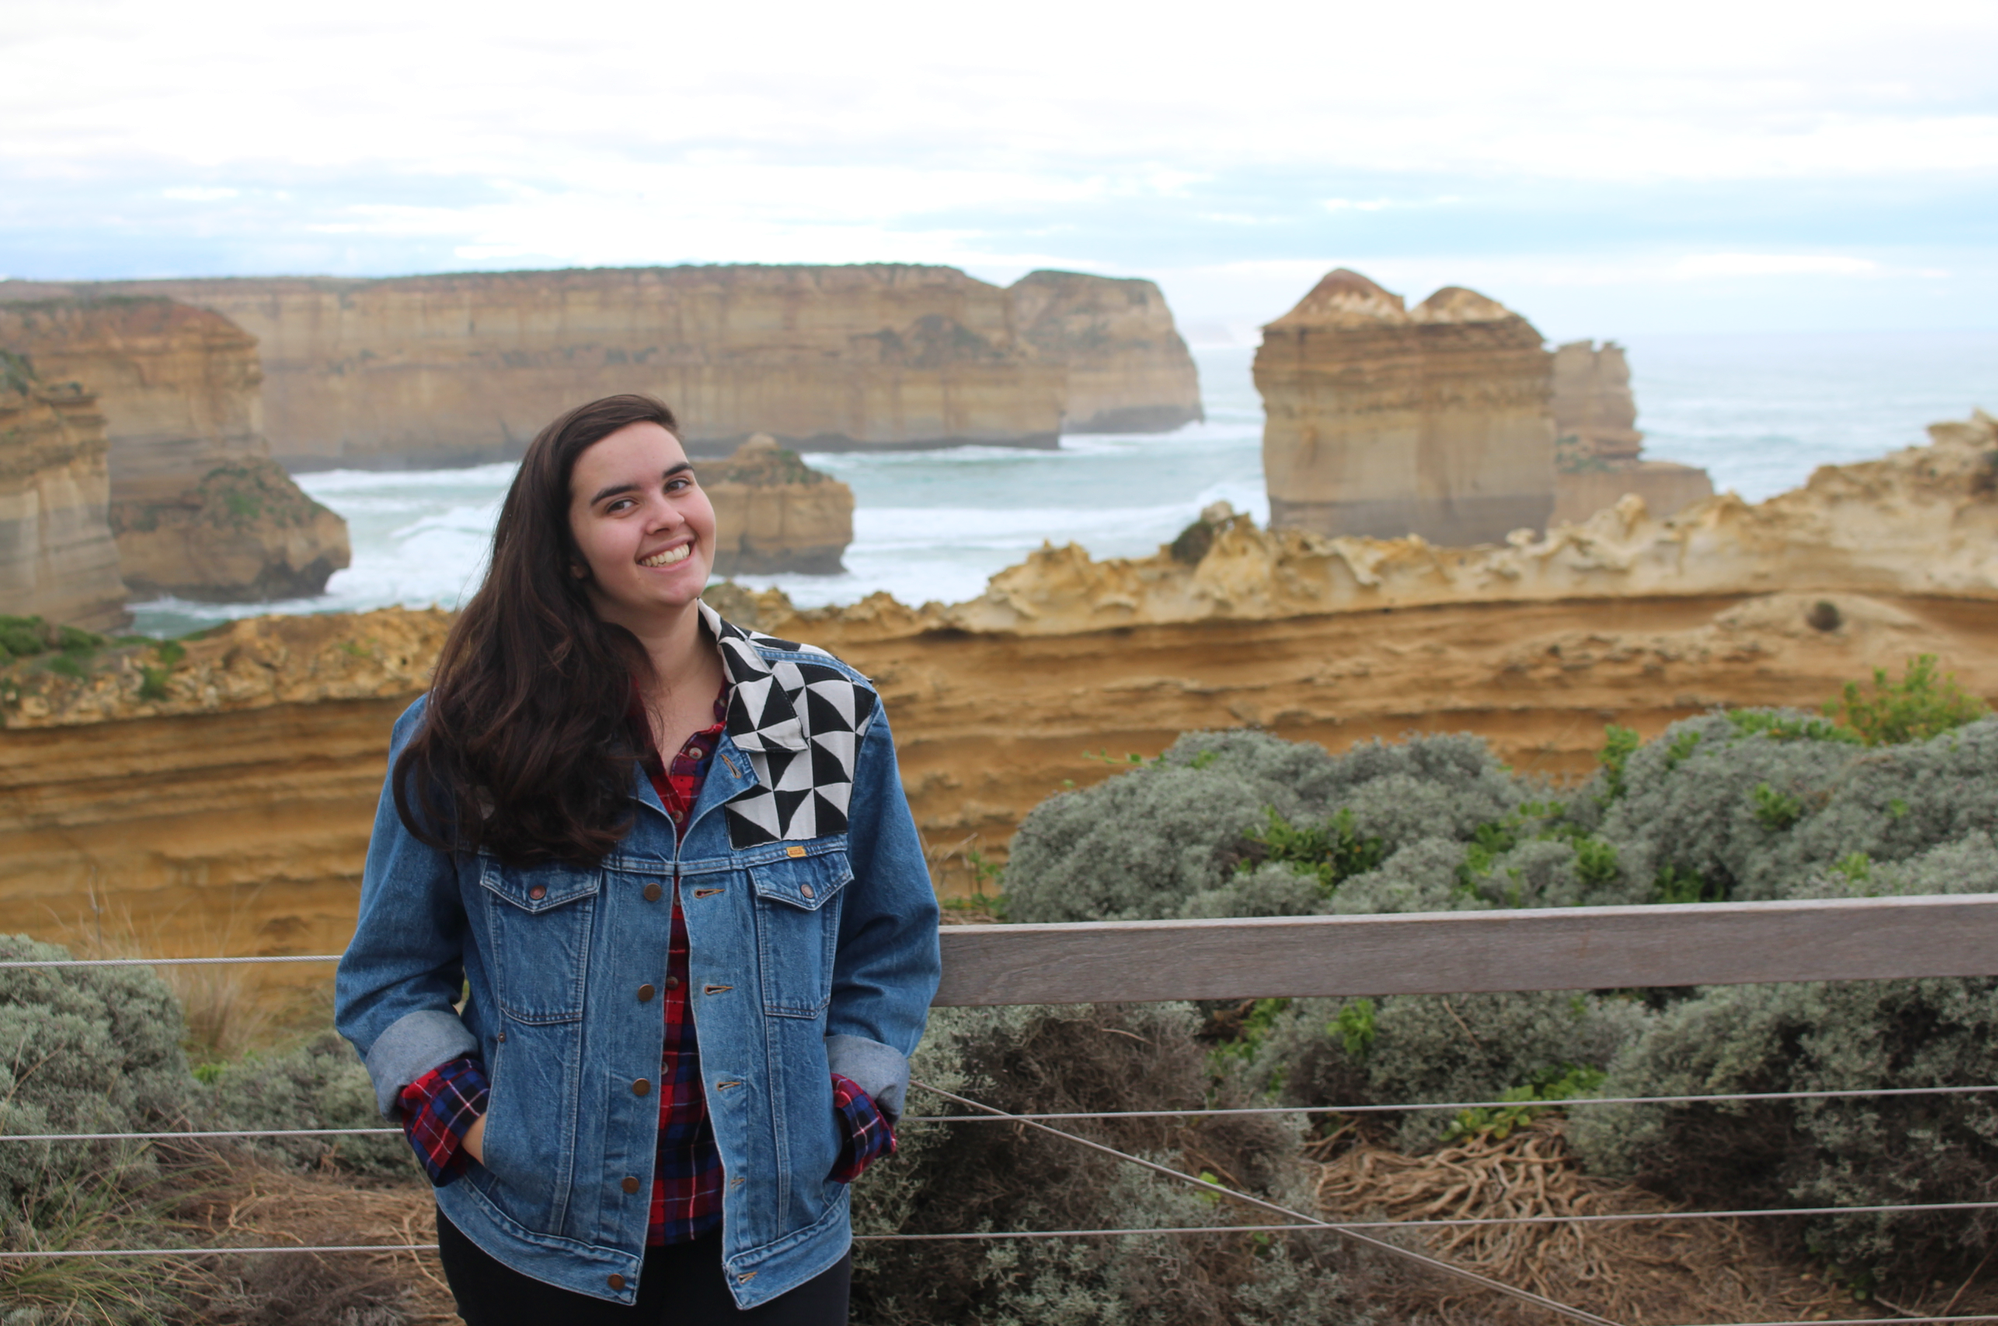 Beth standing in front of cliffs and the ocean in Australia.